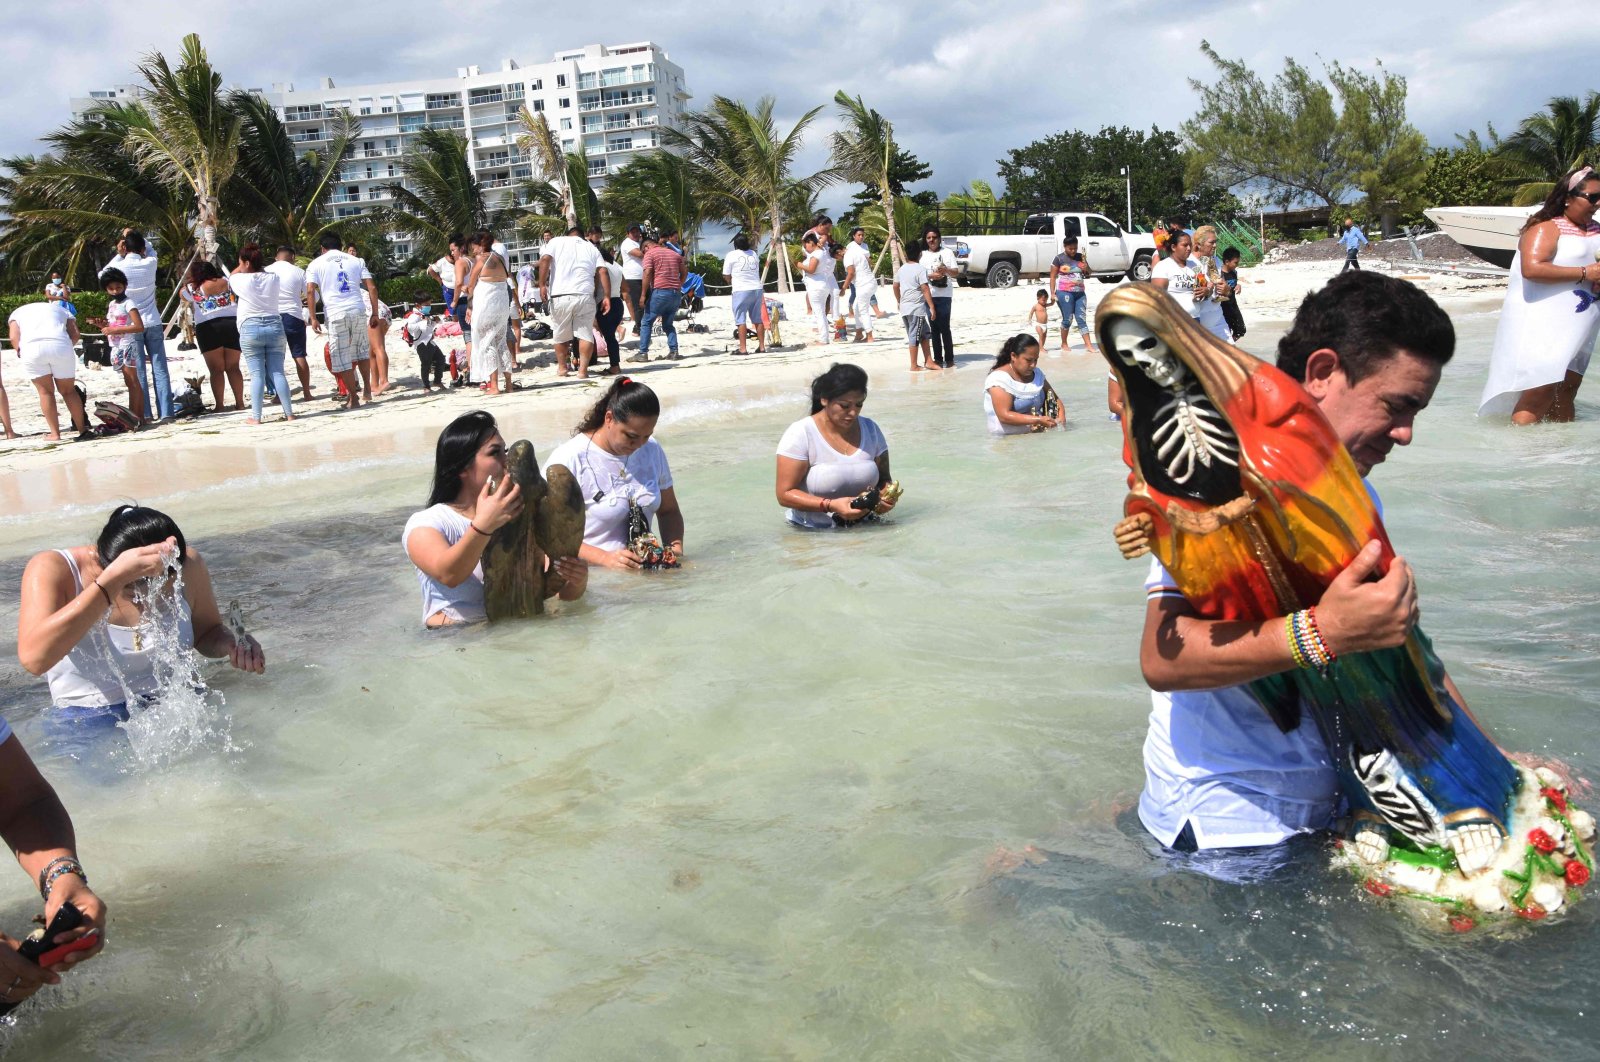 Devotees enter the sea with images of Santa Muerte during a gratitude ceremony for favors received at the beach of Puerto Juarez in Cancun, Quintana Roo state, Mexico, on Nov. 1, 2021. (AFP File Photo)